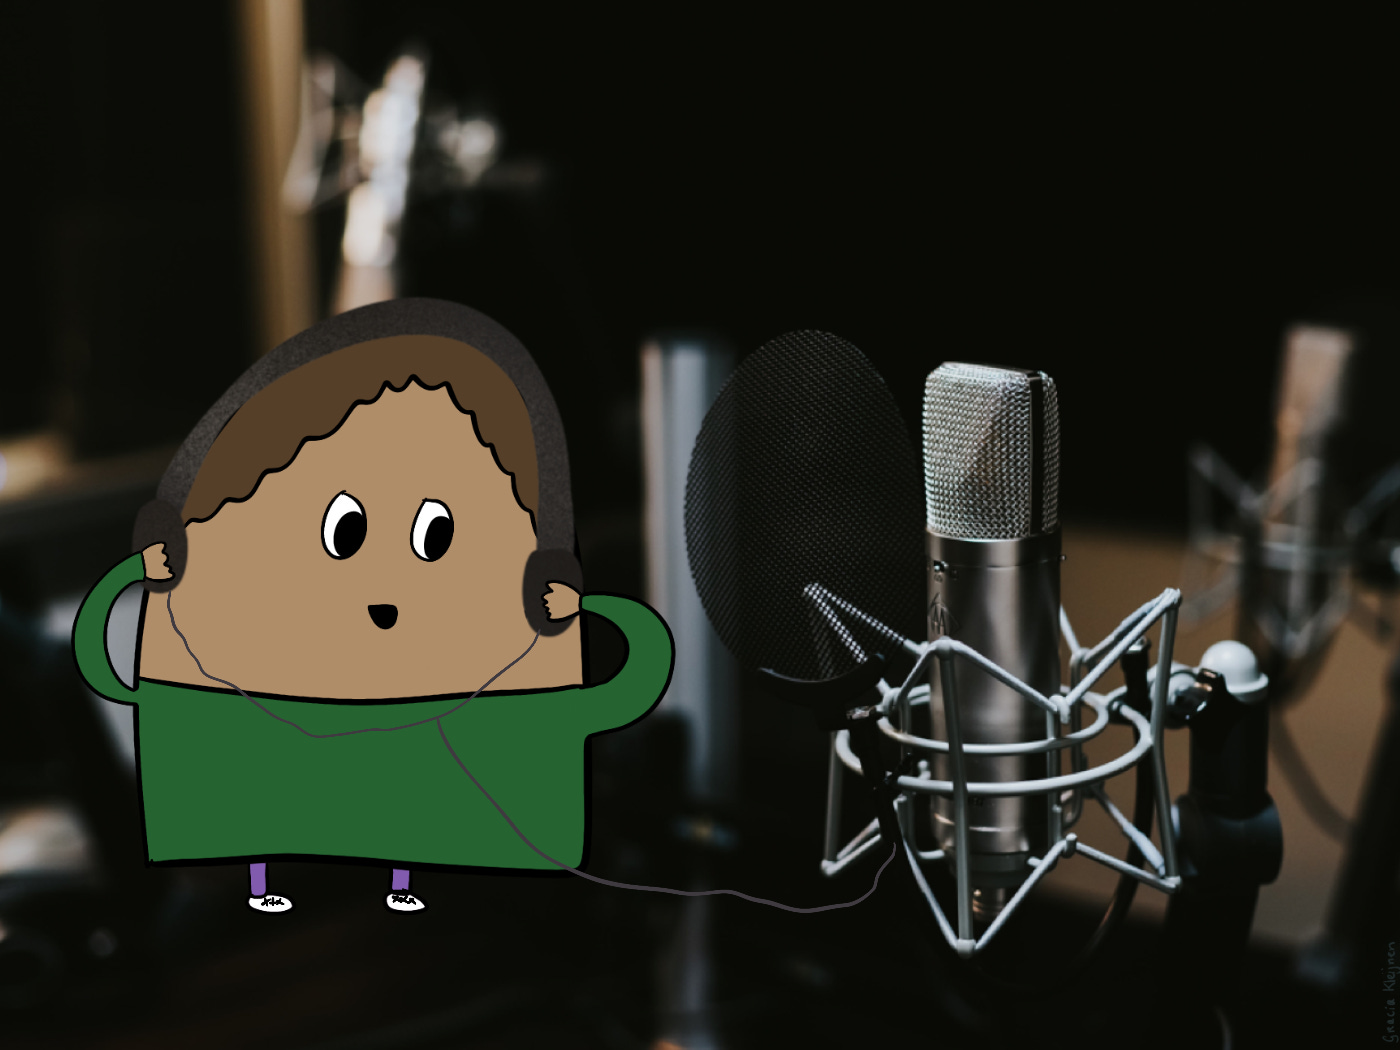 The Blob wearing a headset standing in front of a professional microphone in a recording studio.